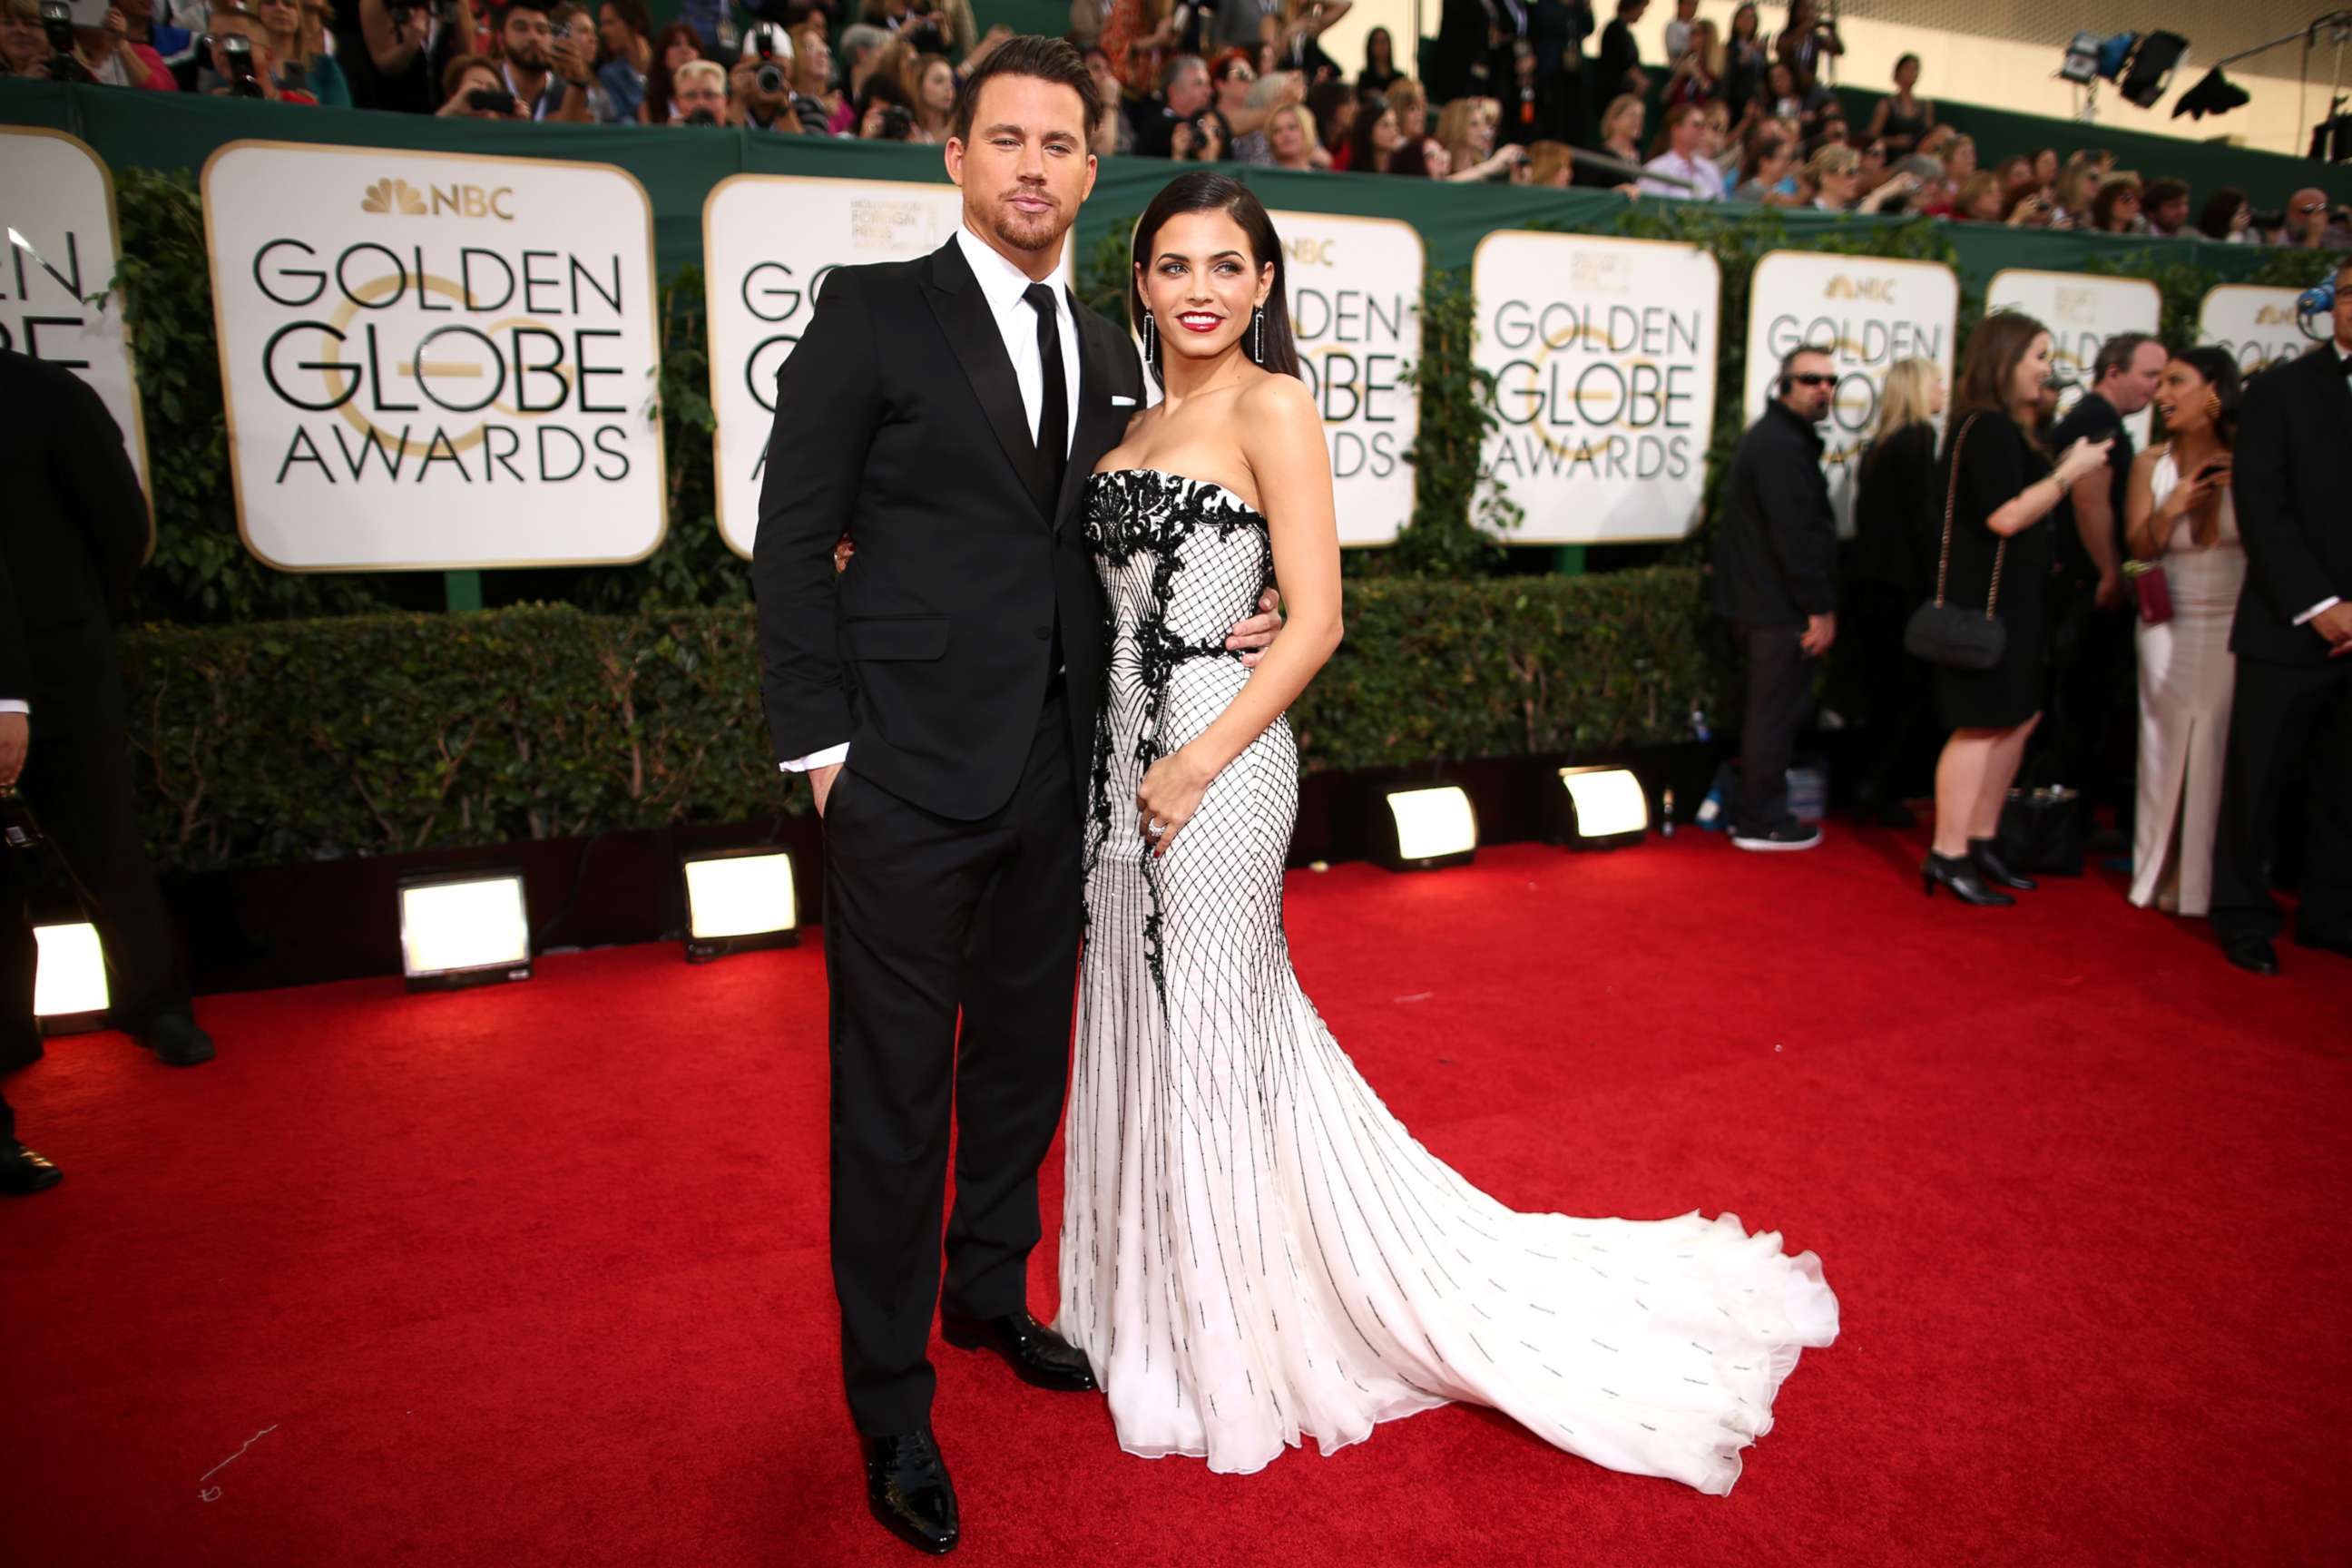 PHOTO: In this file photo dated Jan. 12, 2014, actors Channing Tatum and Jenna Dewan arrive to the 71st Annual Golden Globe Awards held at the Beverly Hilton Hotel, in Beverly Hills, Calif.